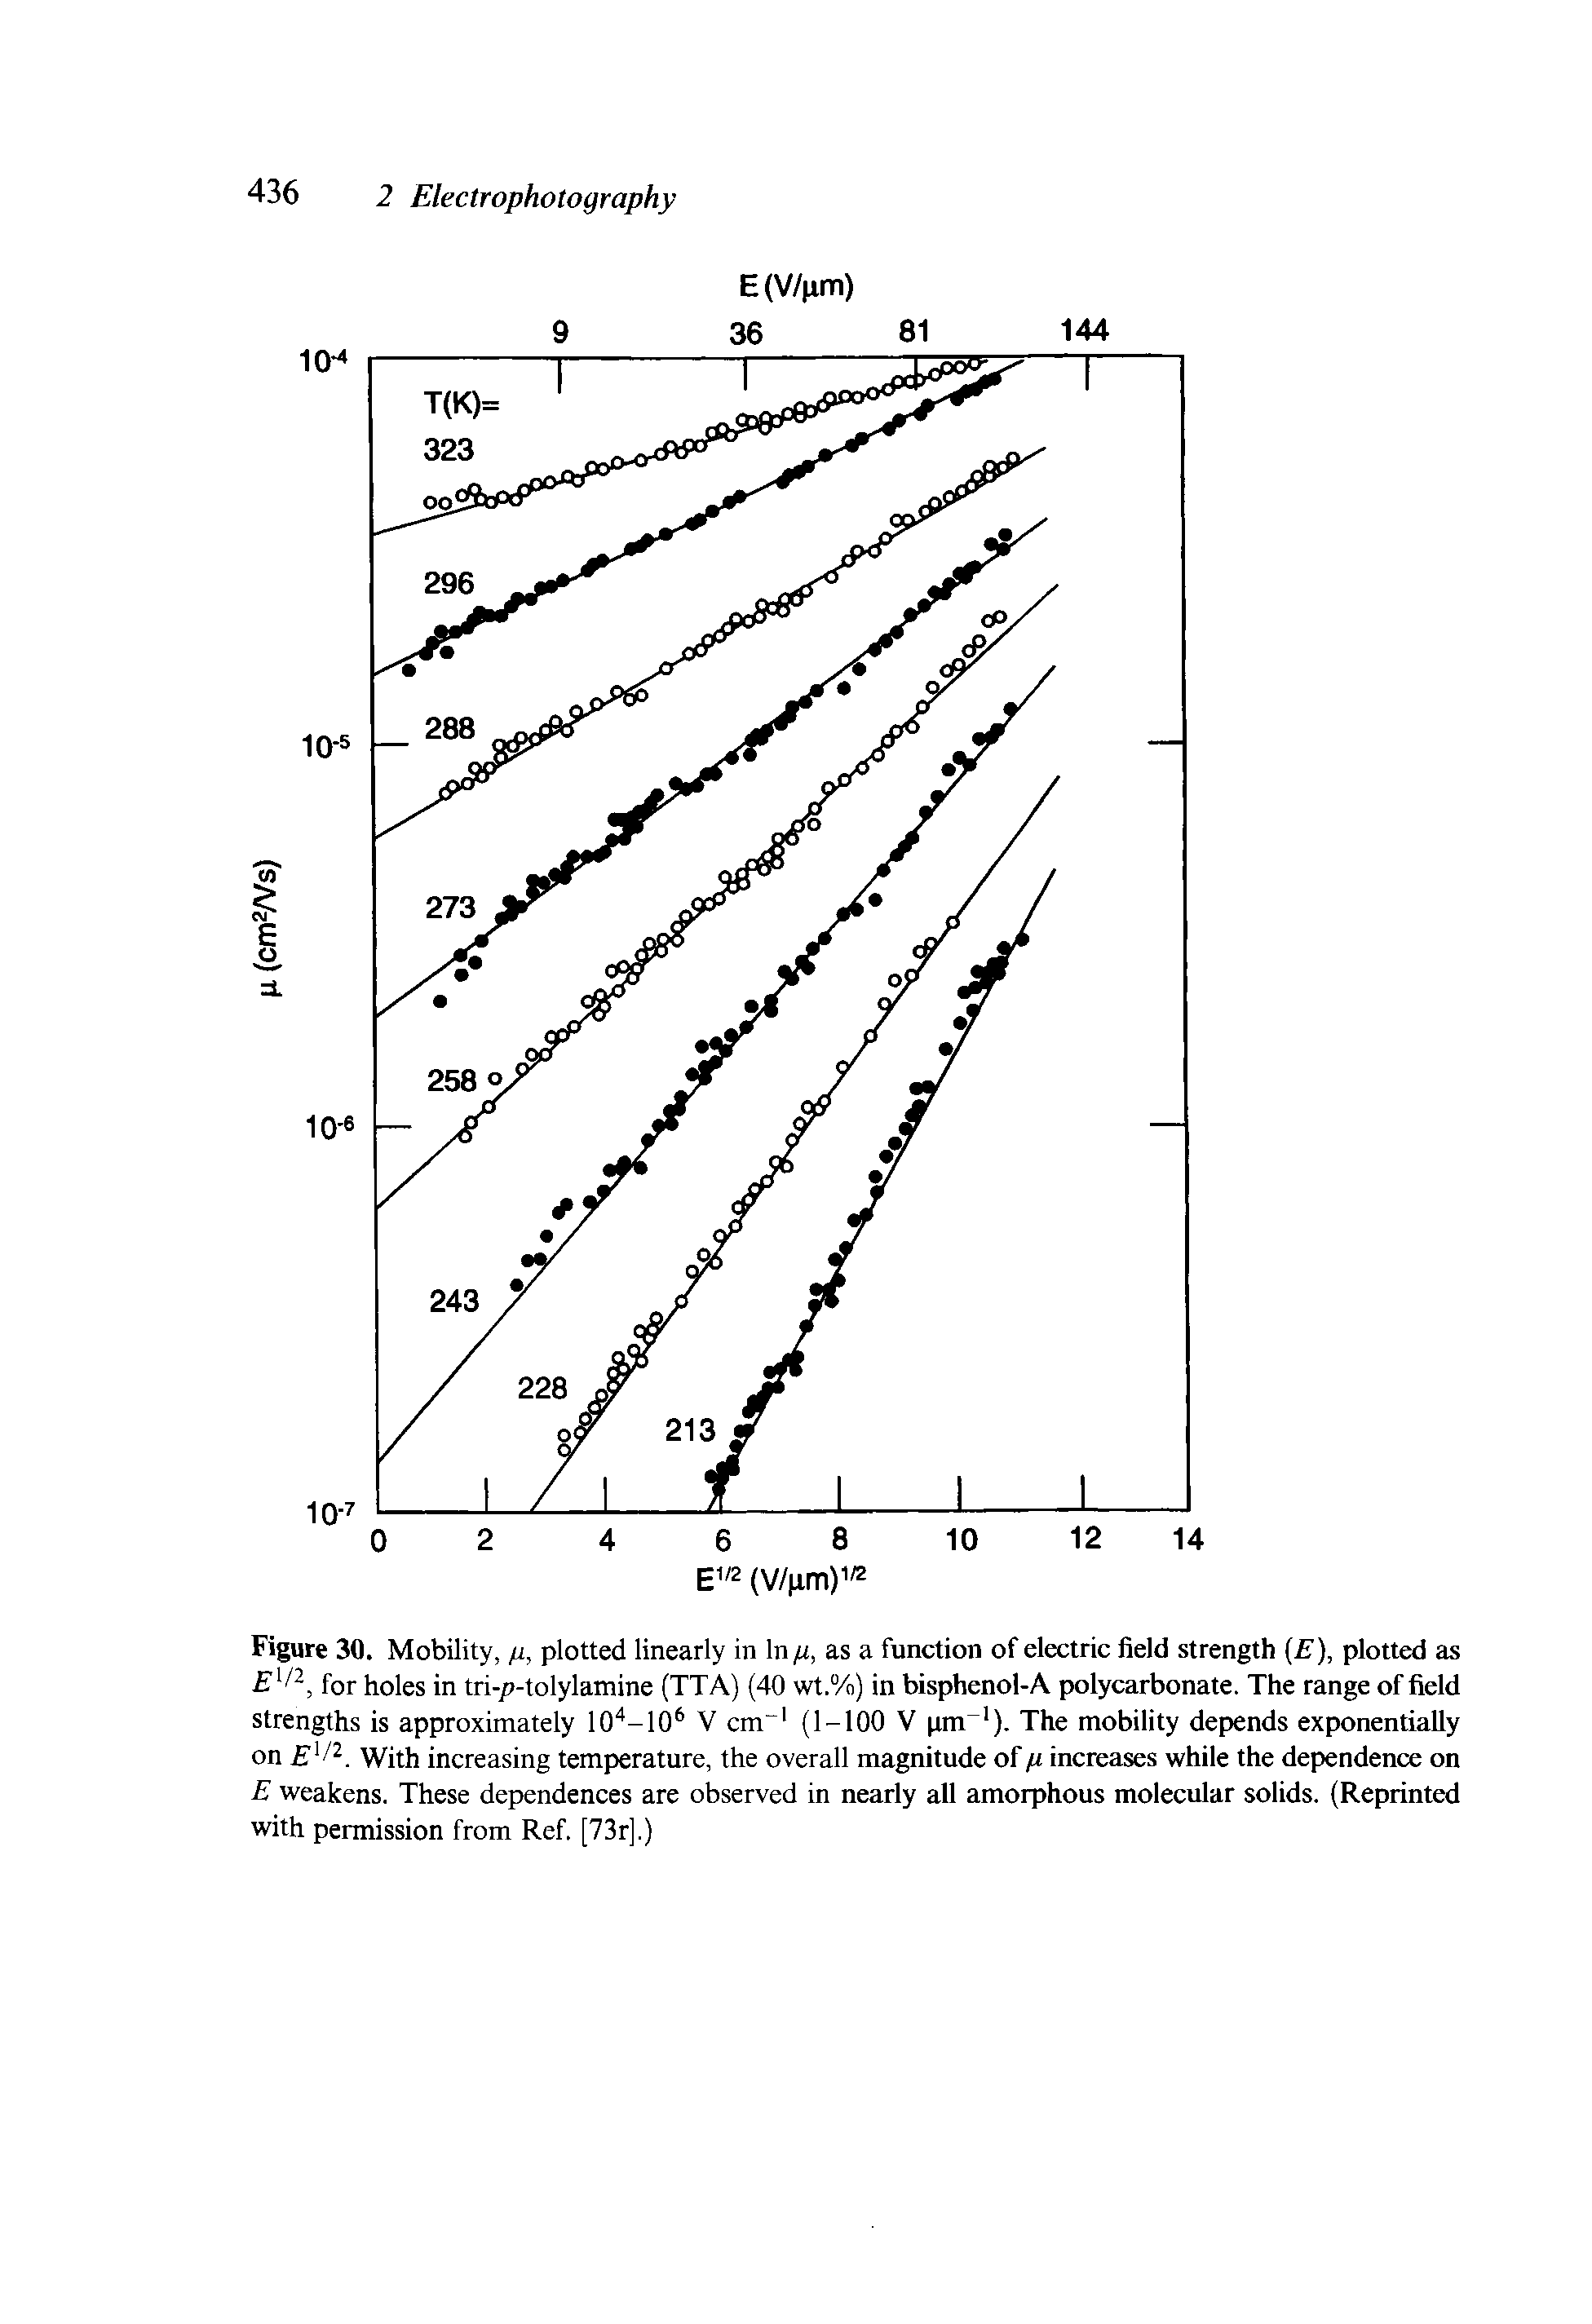 Figure 30. Mobility, g, plotted linearly in In, as a function of electric field strength (E), plotted as for holes in tri-/ -tolylamine (TTA) (40 wt.%) in bisphenol-A polycarbonate. The range of field strengths is approximately 10 -10 V cm (1-100 V pm ). The mobility depends exponentially on With increasing temperature, the overall magnitude of/r increases while the dependence on E weakens. These dependences are observed in nearly all amorphous molecular solids. (Reprinted with permission from Ref. [73r].)...